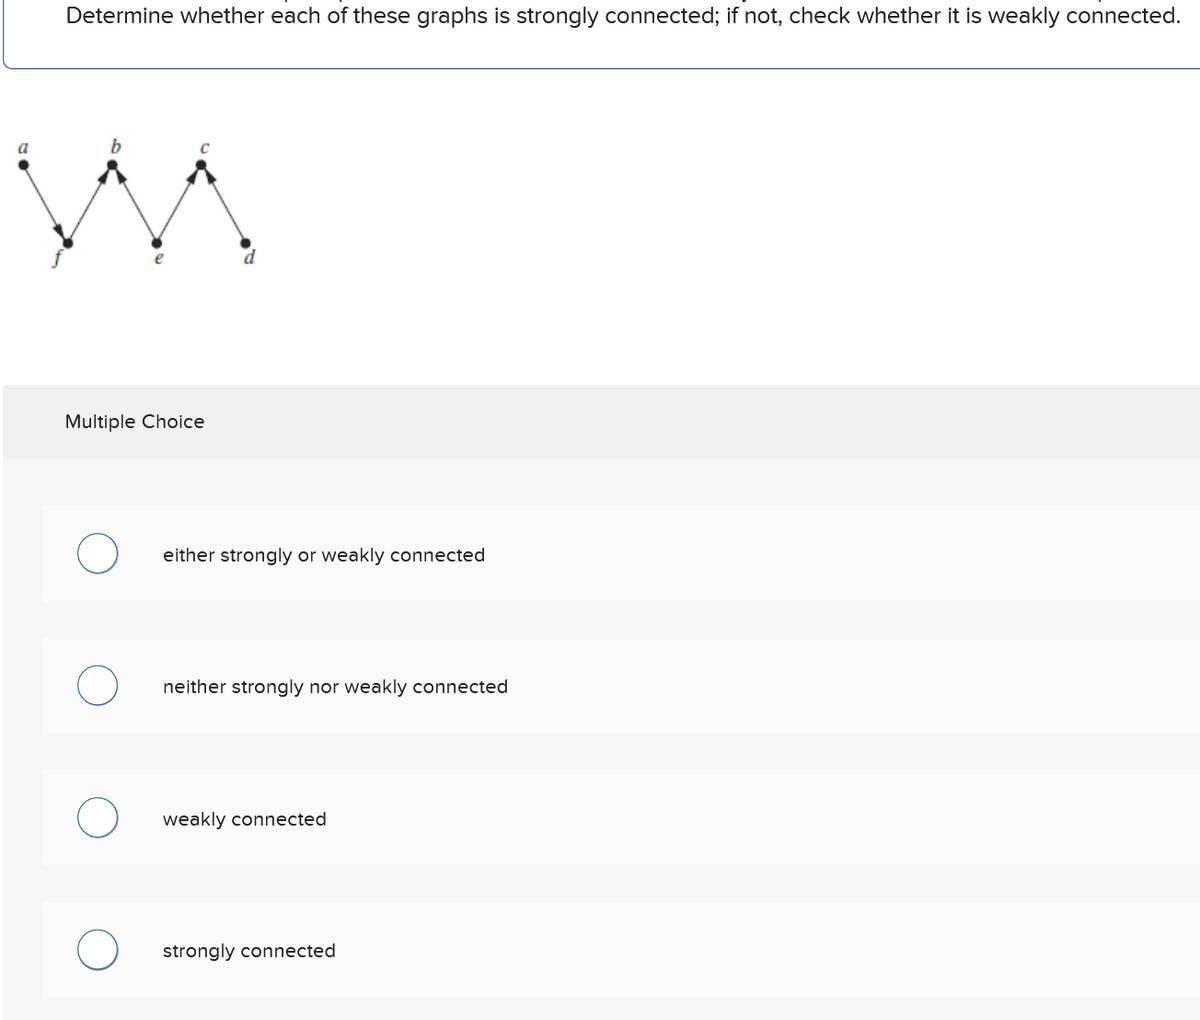 Determine whether each of these graphs is strongly connected; if not, check whether it is weakly connected.
a
b
W
Multiple Choice
either strongly or weakly connected
neither strongly nor weakly connected
weakly connected
strongly connected